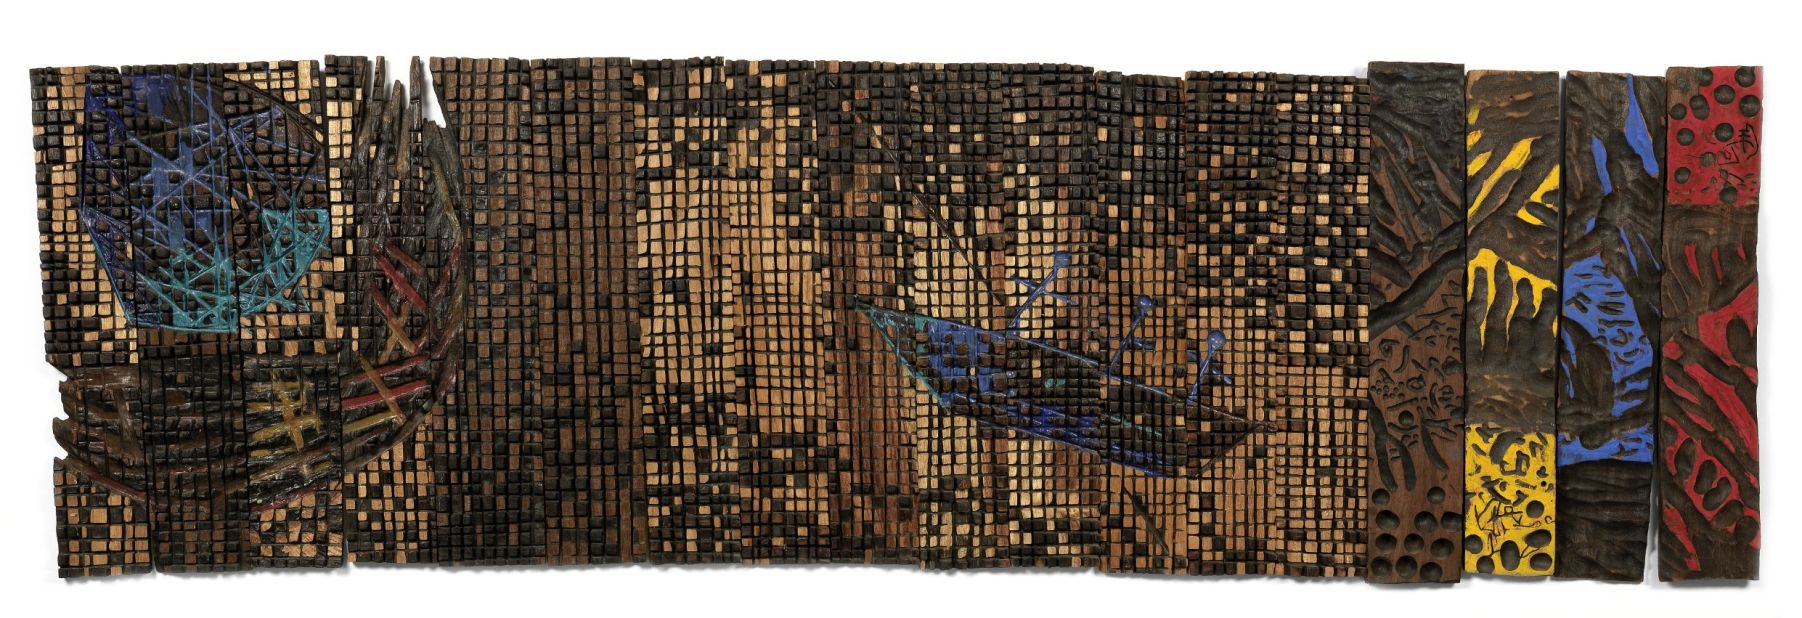 Another El Anatsui piece, "The Pilgrims," comes as an ensemble of 18 elements went for £32,500.